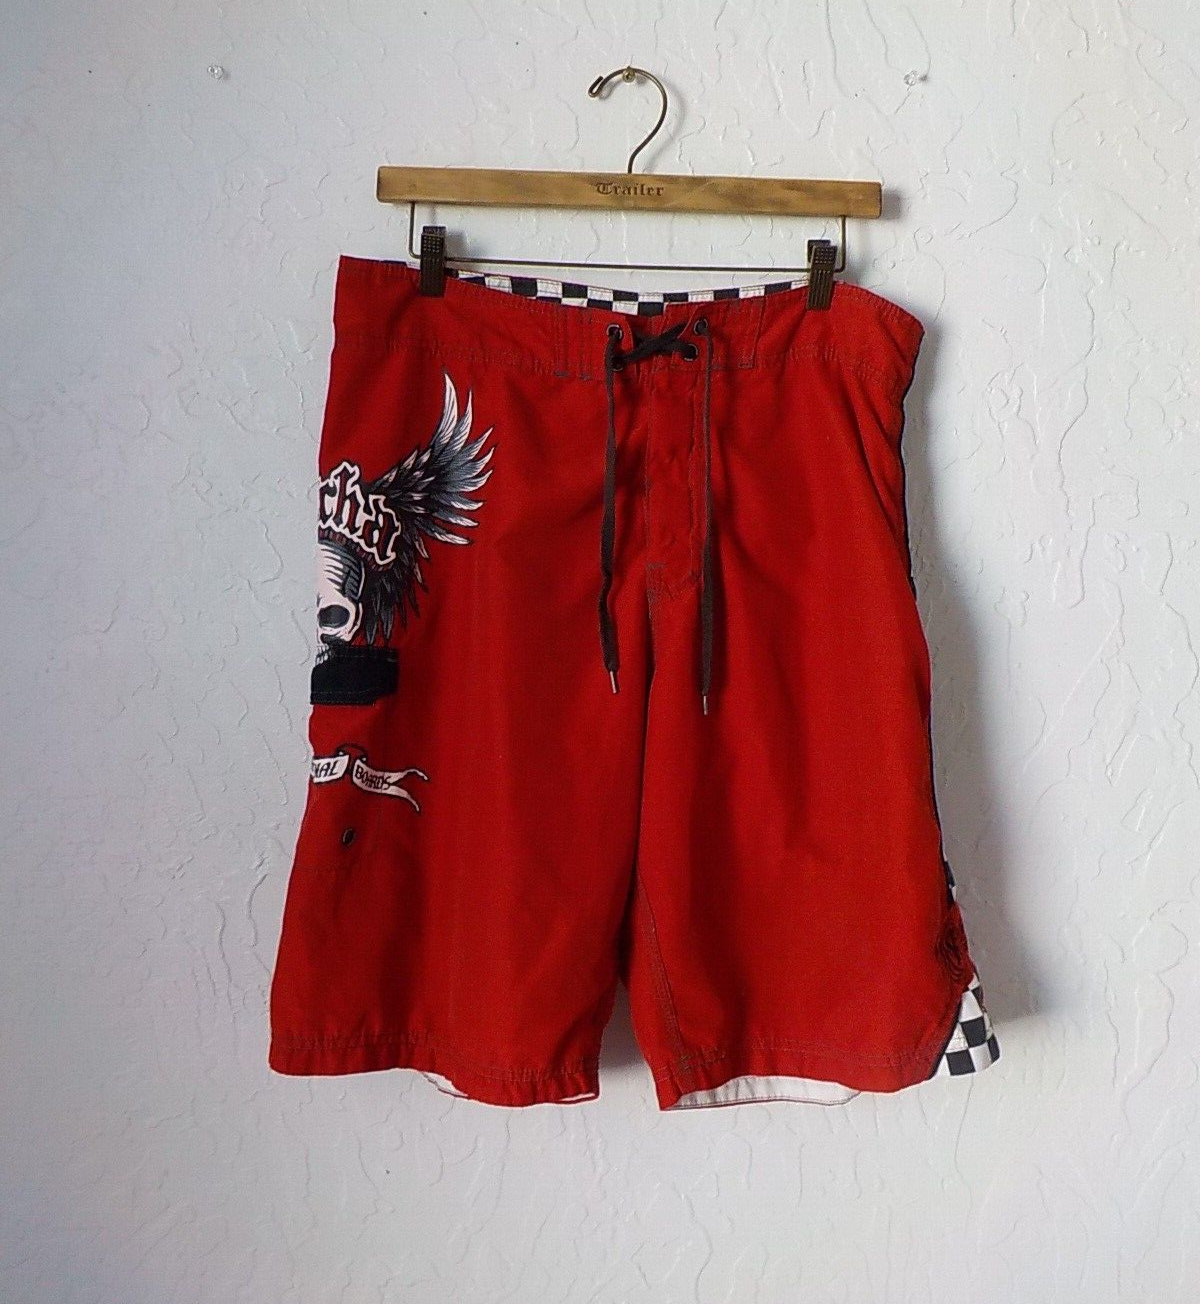 Maui Rippers Lifeguard Red Board Shorts Swim Trunks Surfing Men's